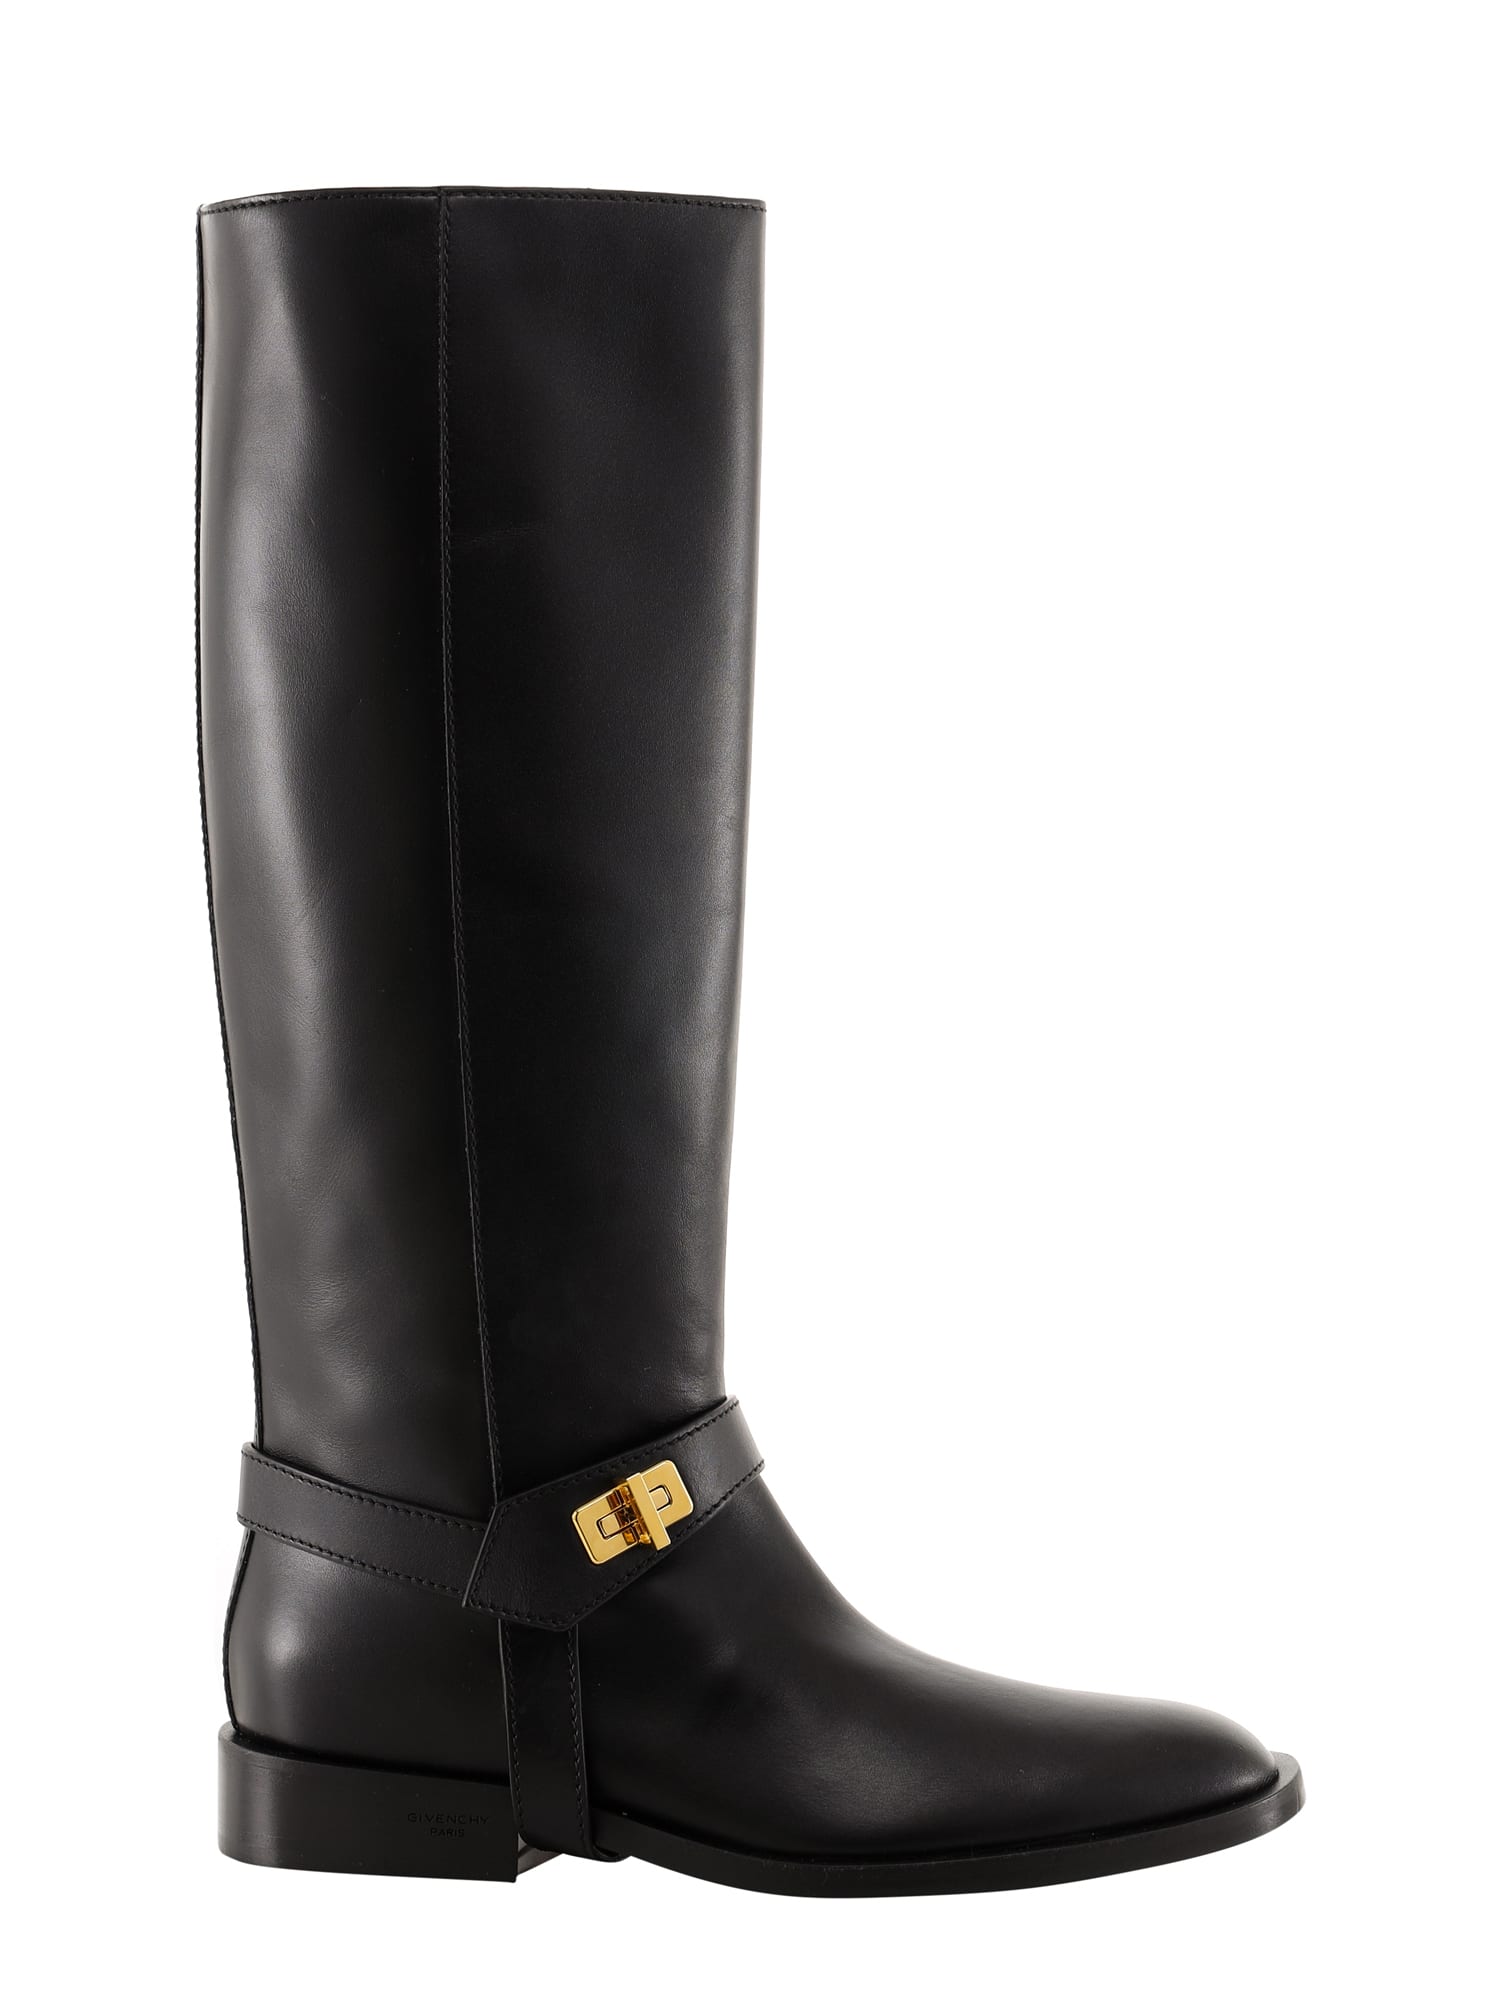 Givenchy Calf Leather Riding Boots